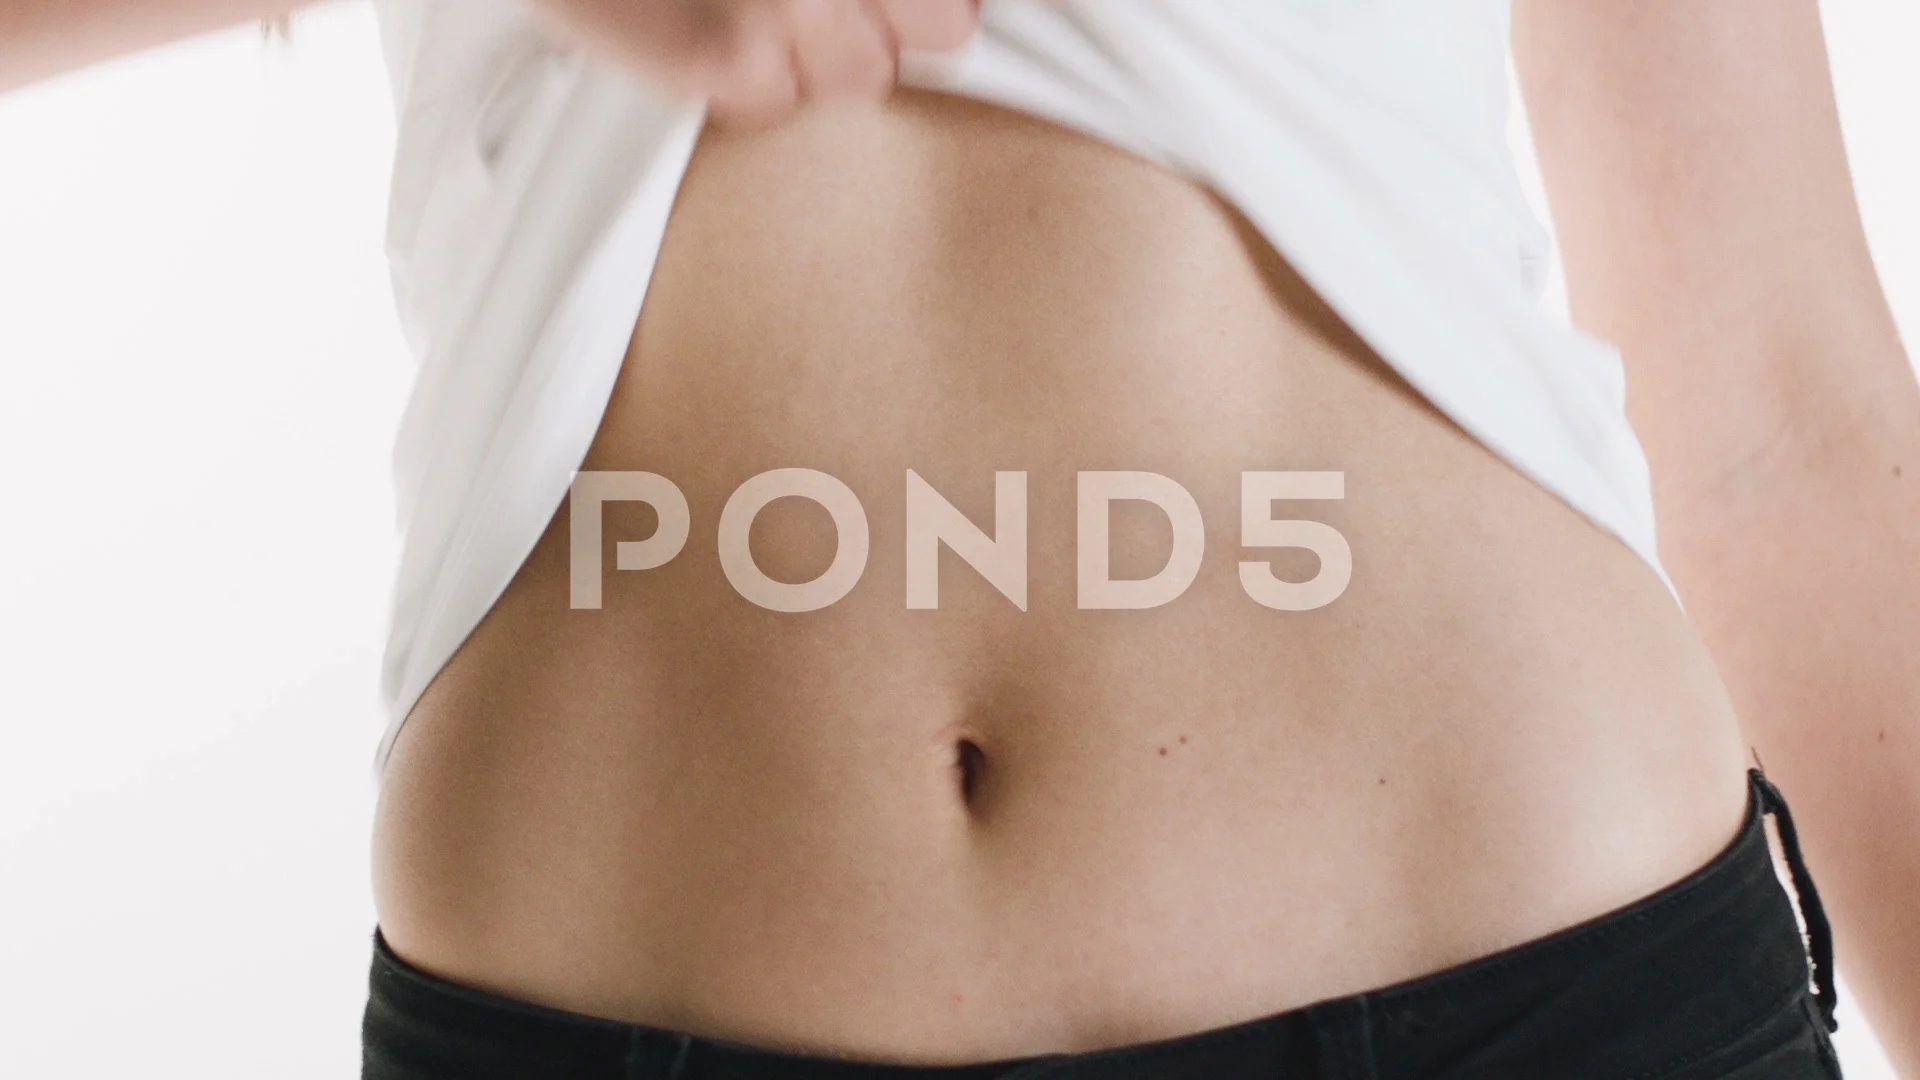 Close-up of a girl's fit and slim belly , Stock Video